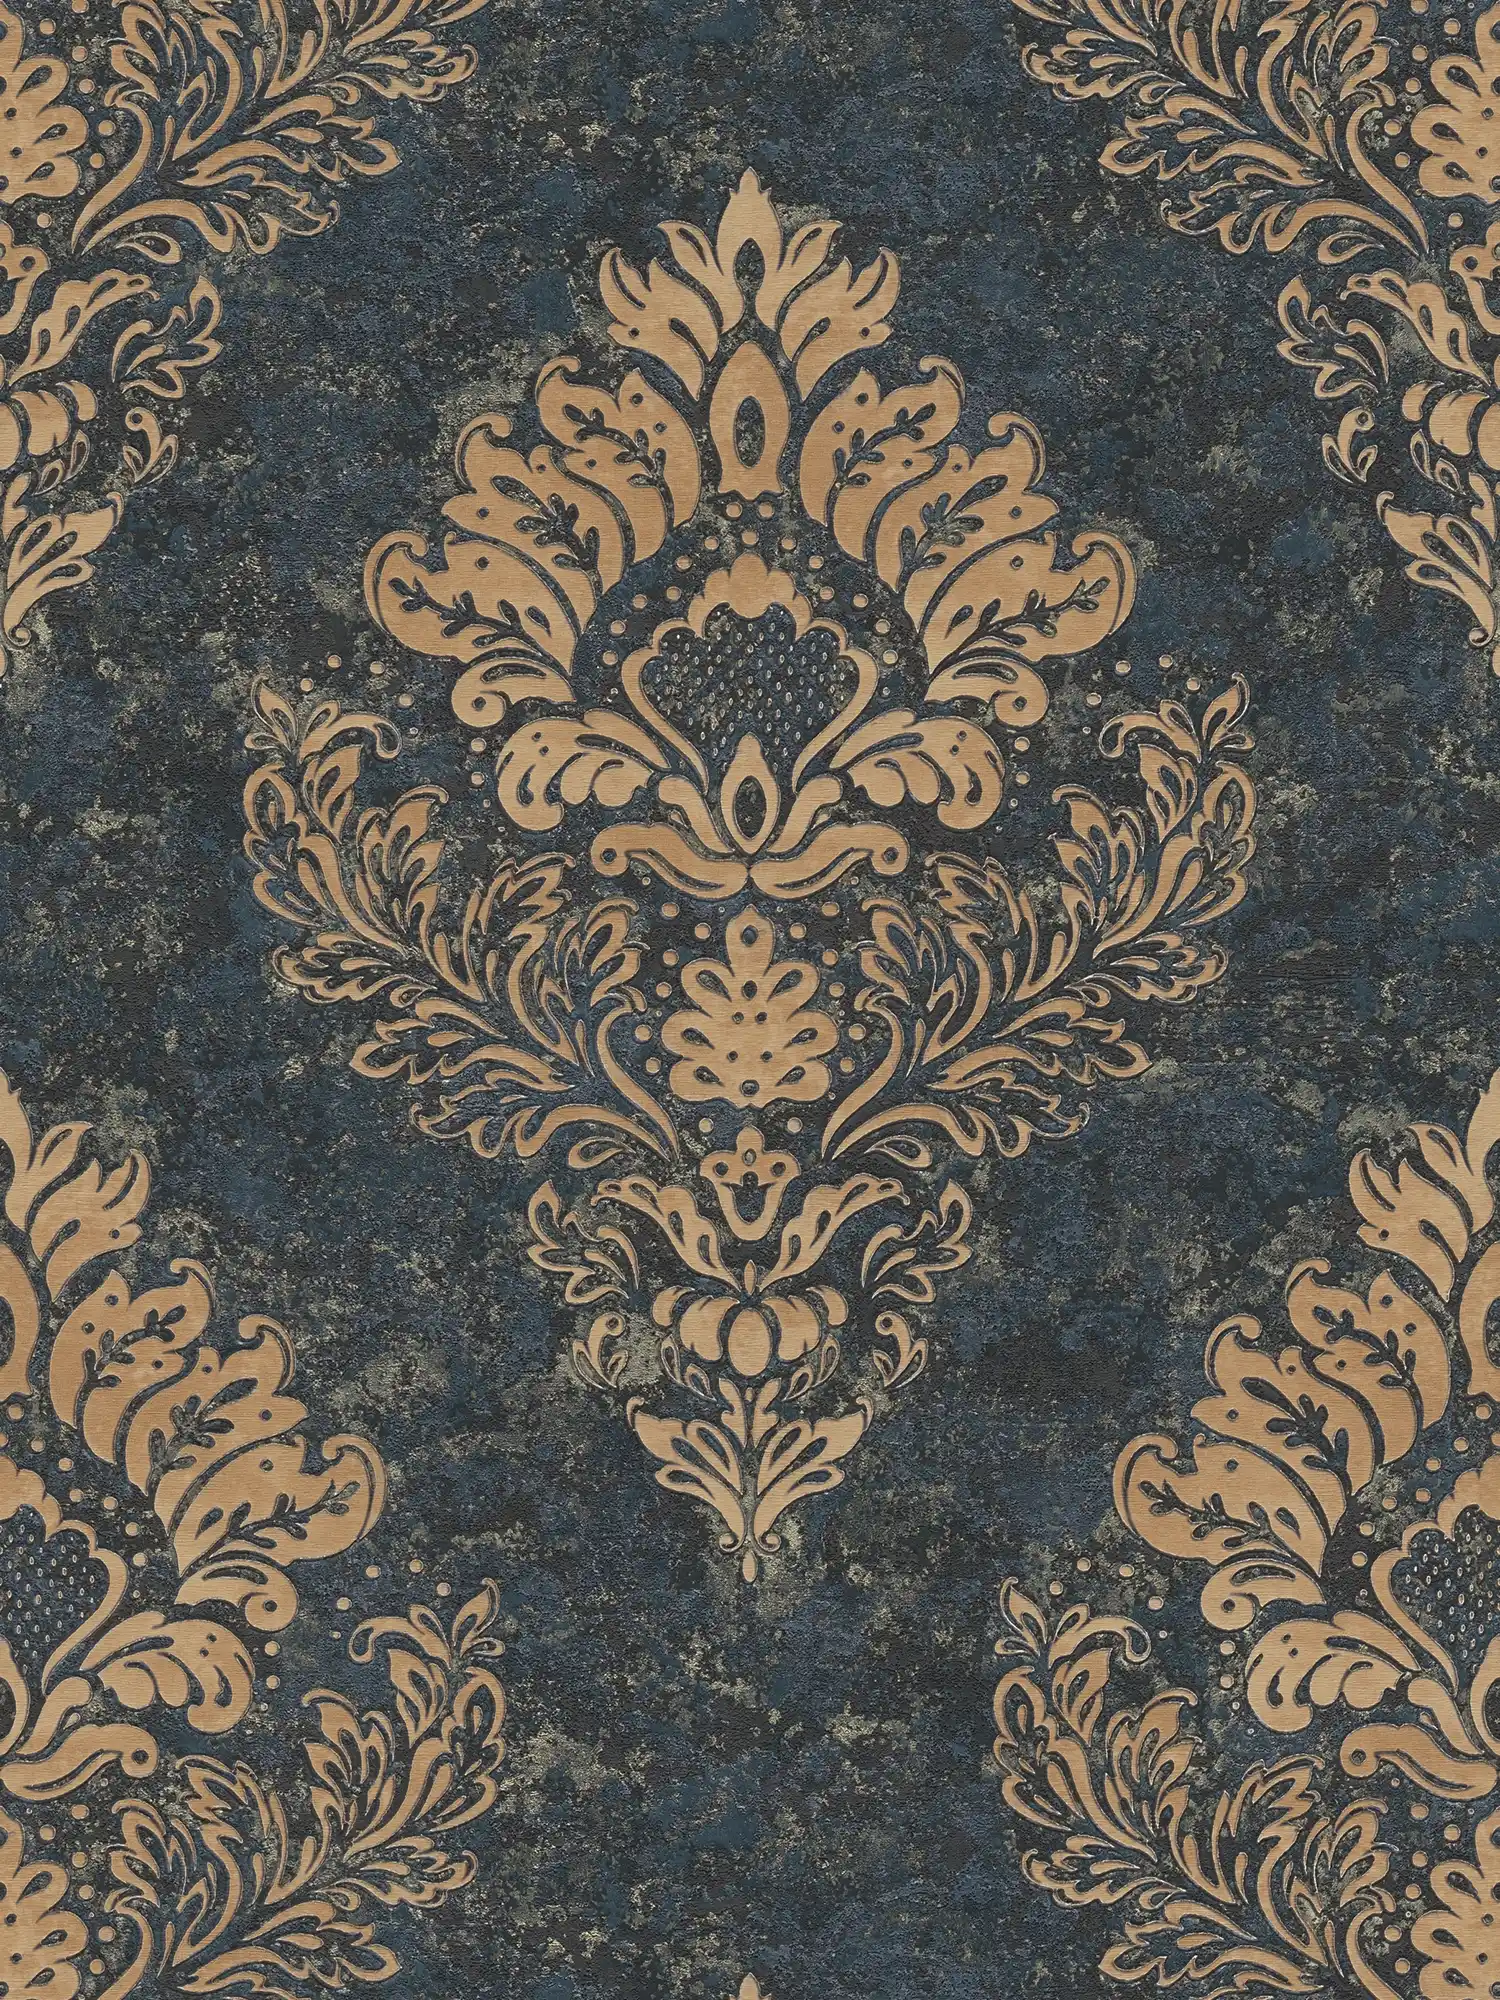 Ornamental wallpaper with floral style & gold effect - beige, blue, brown
